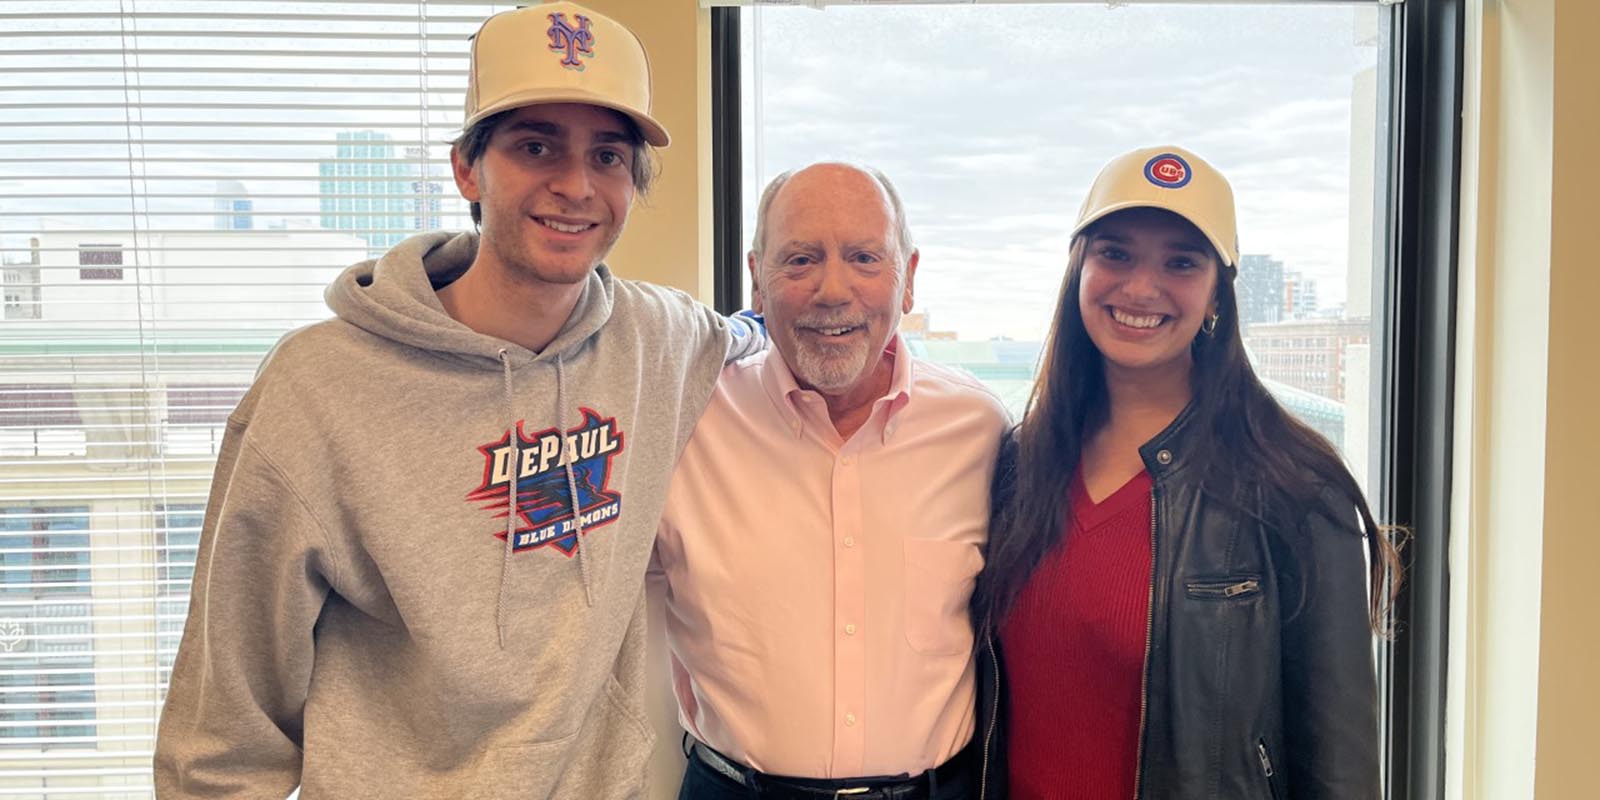 Two students, with baseball caps on, stand with their public relations professor in a classroom